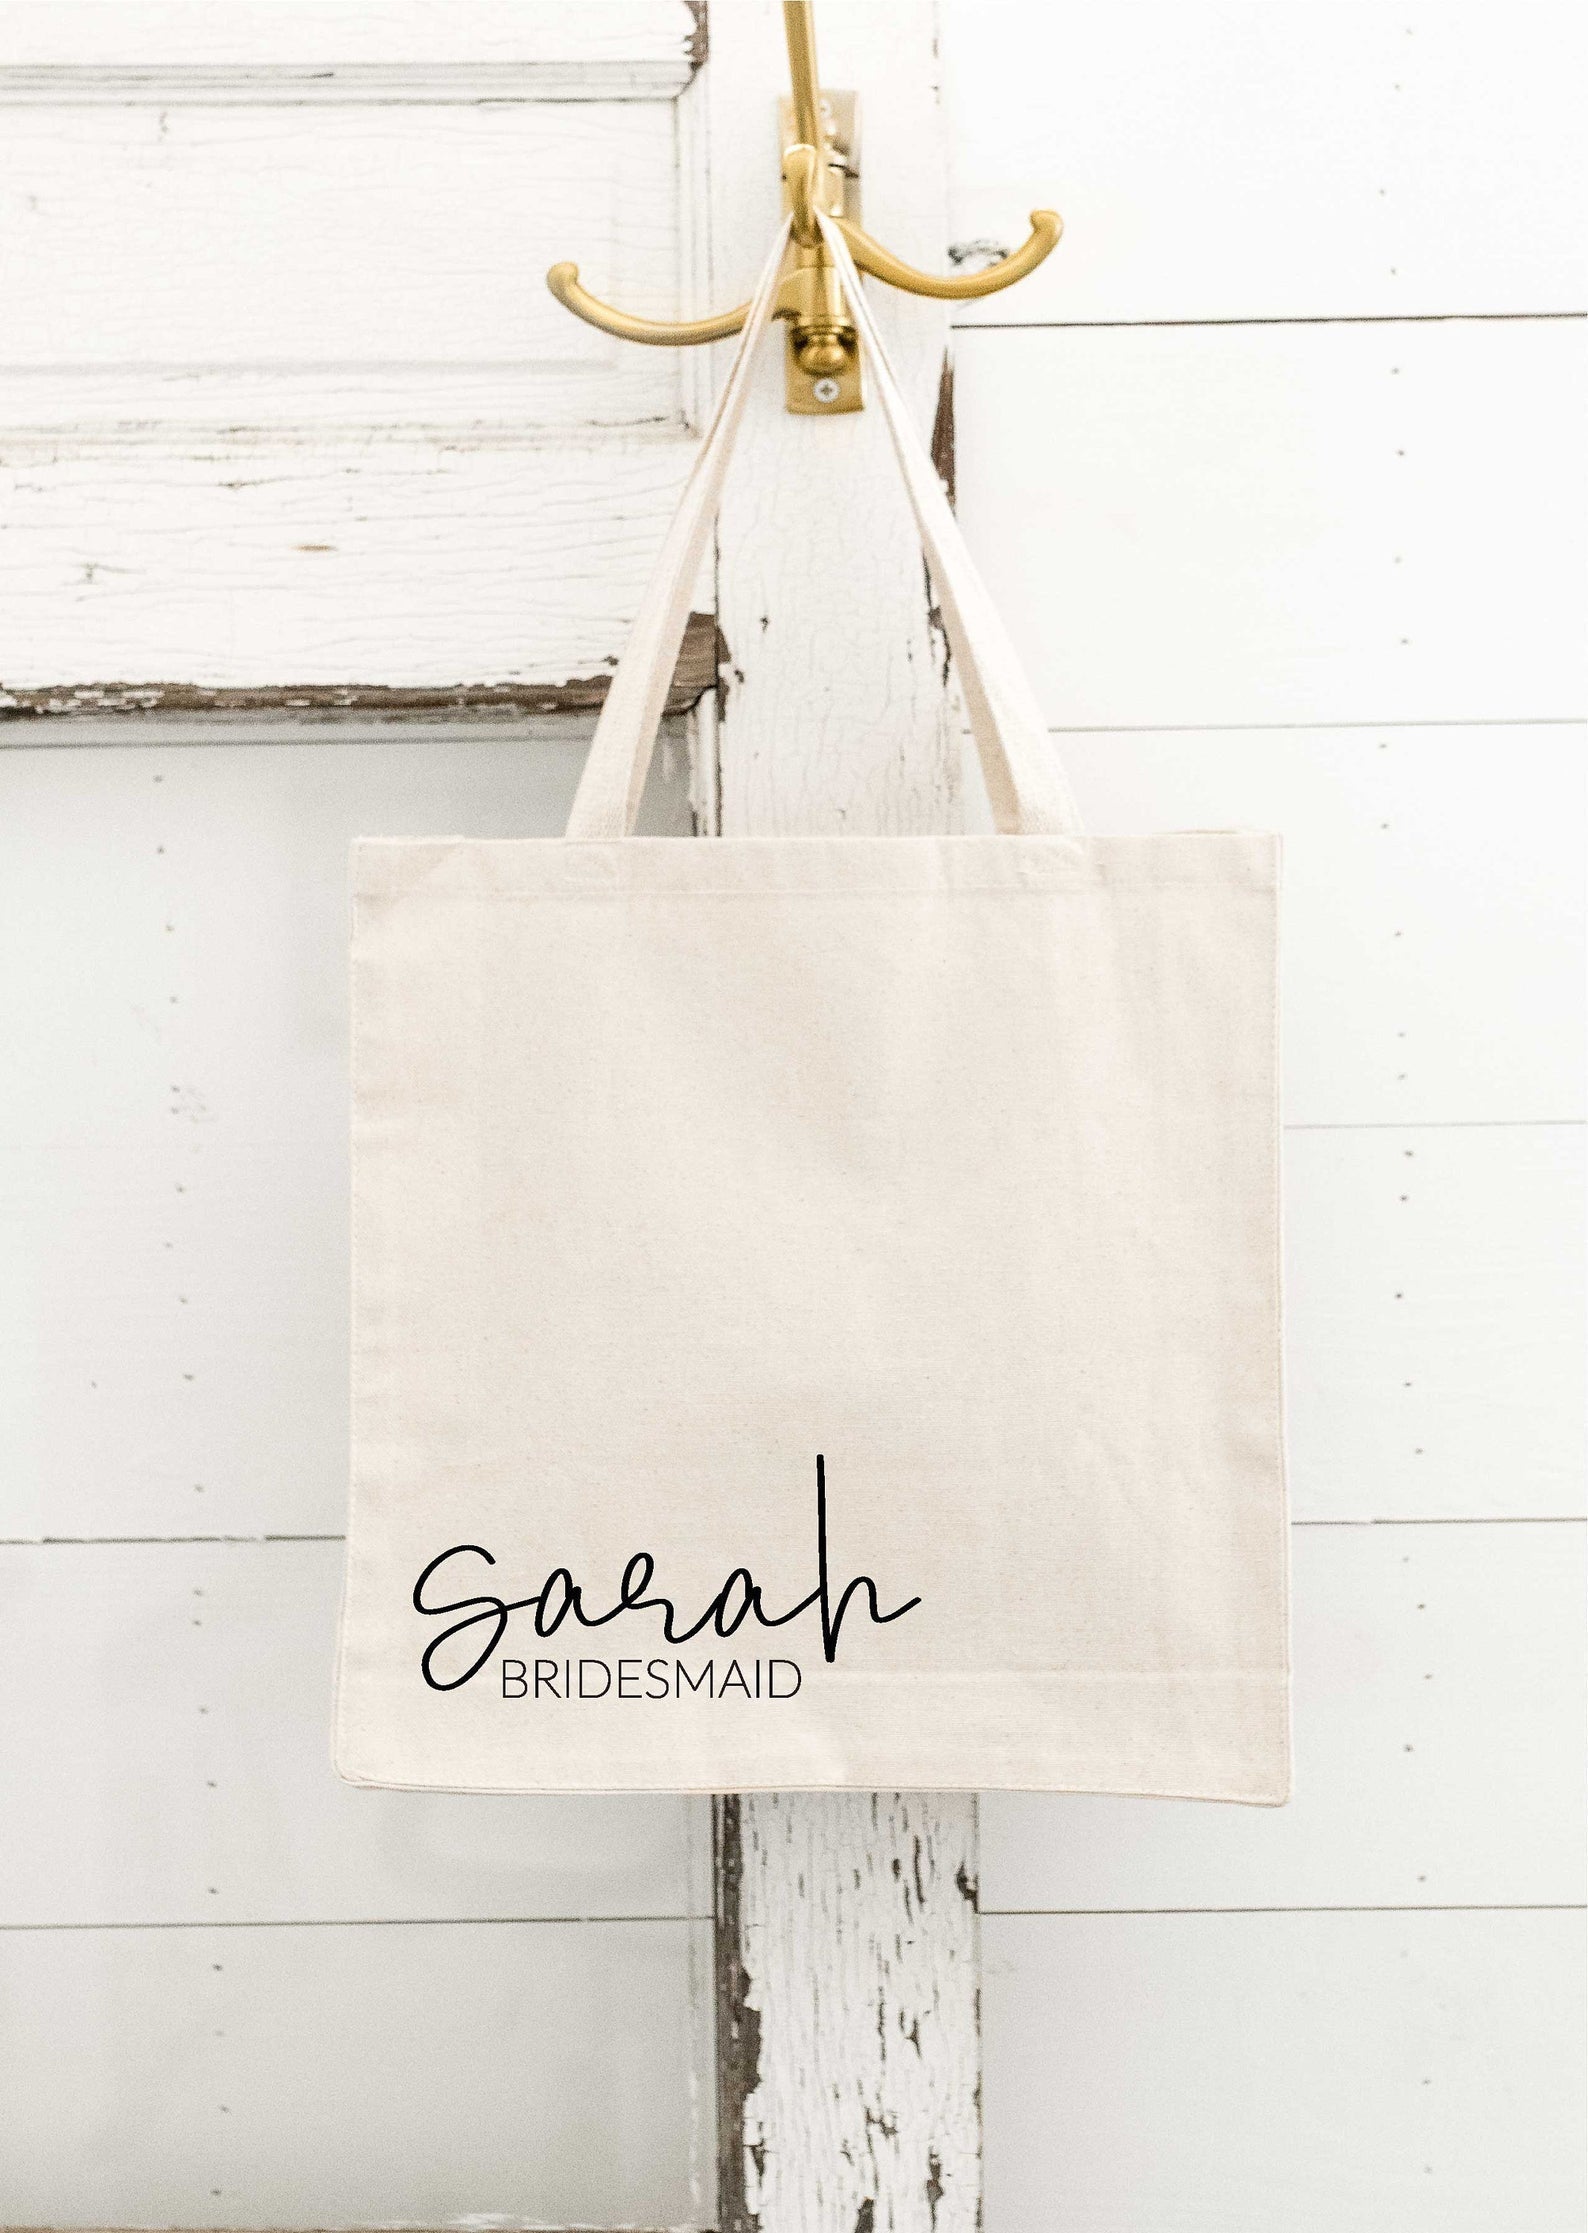 Name Tote Bag Custom Canvas Tote Bags Personalized Tote 